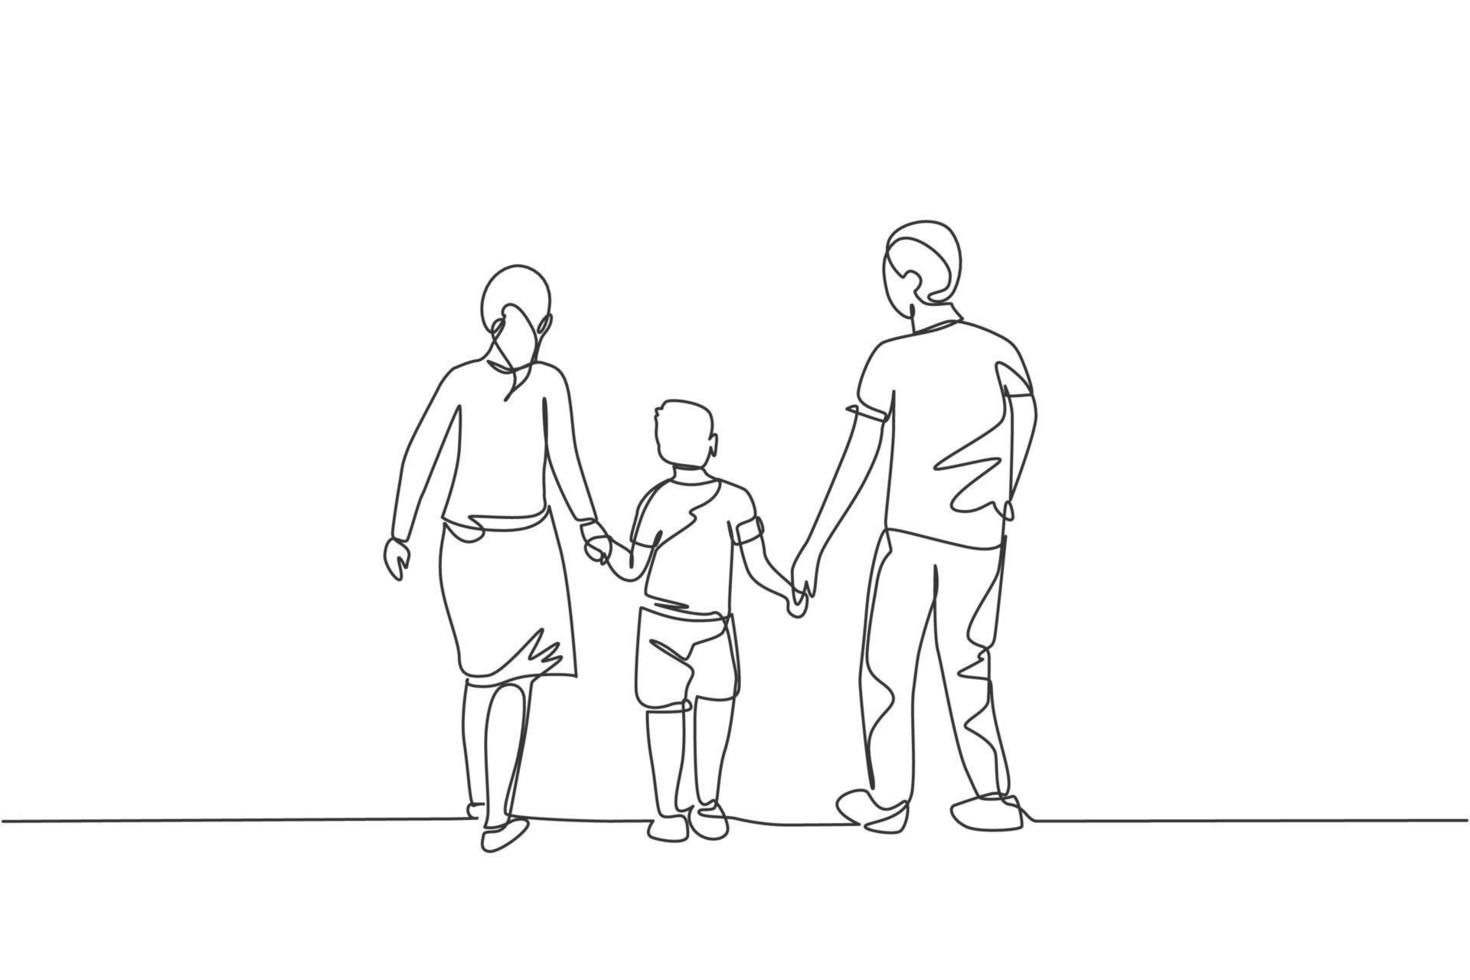 One single line drawing of young happy mother and father lead their son walking together, holding his hands graphic vector illustration. Parenting education concept. Modern continuous line draw design